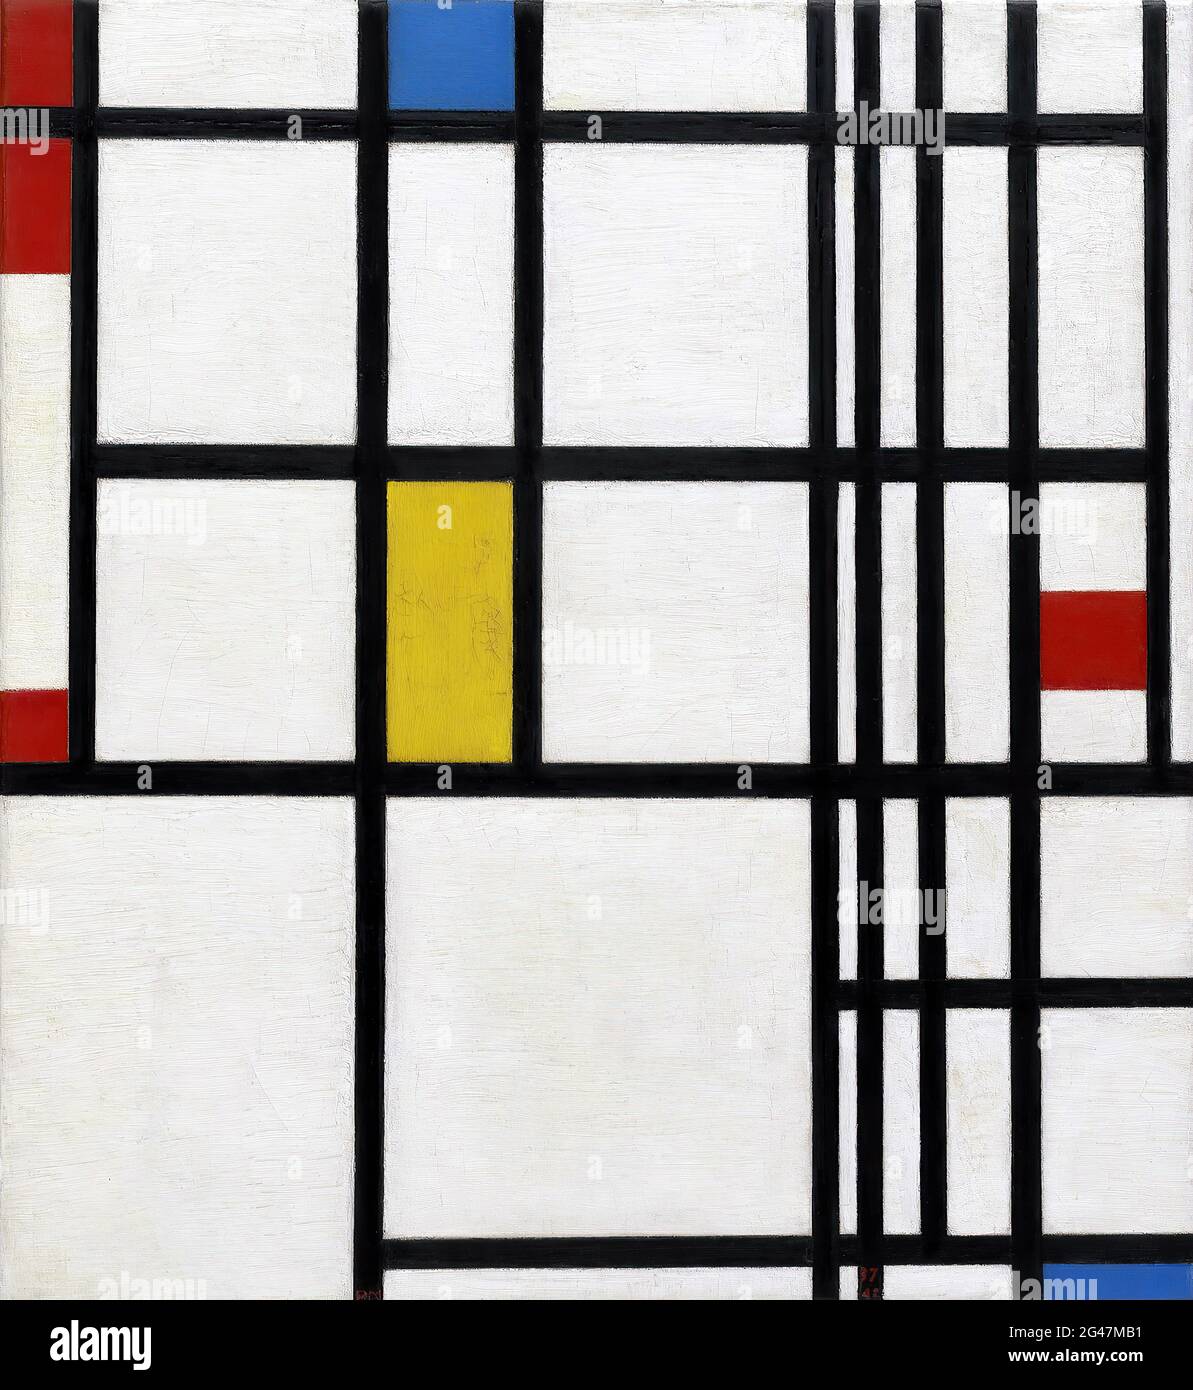 Piet Mondrian - Composition in Red Blue and Yellow Stock Photo - Alamy